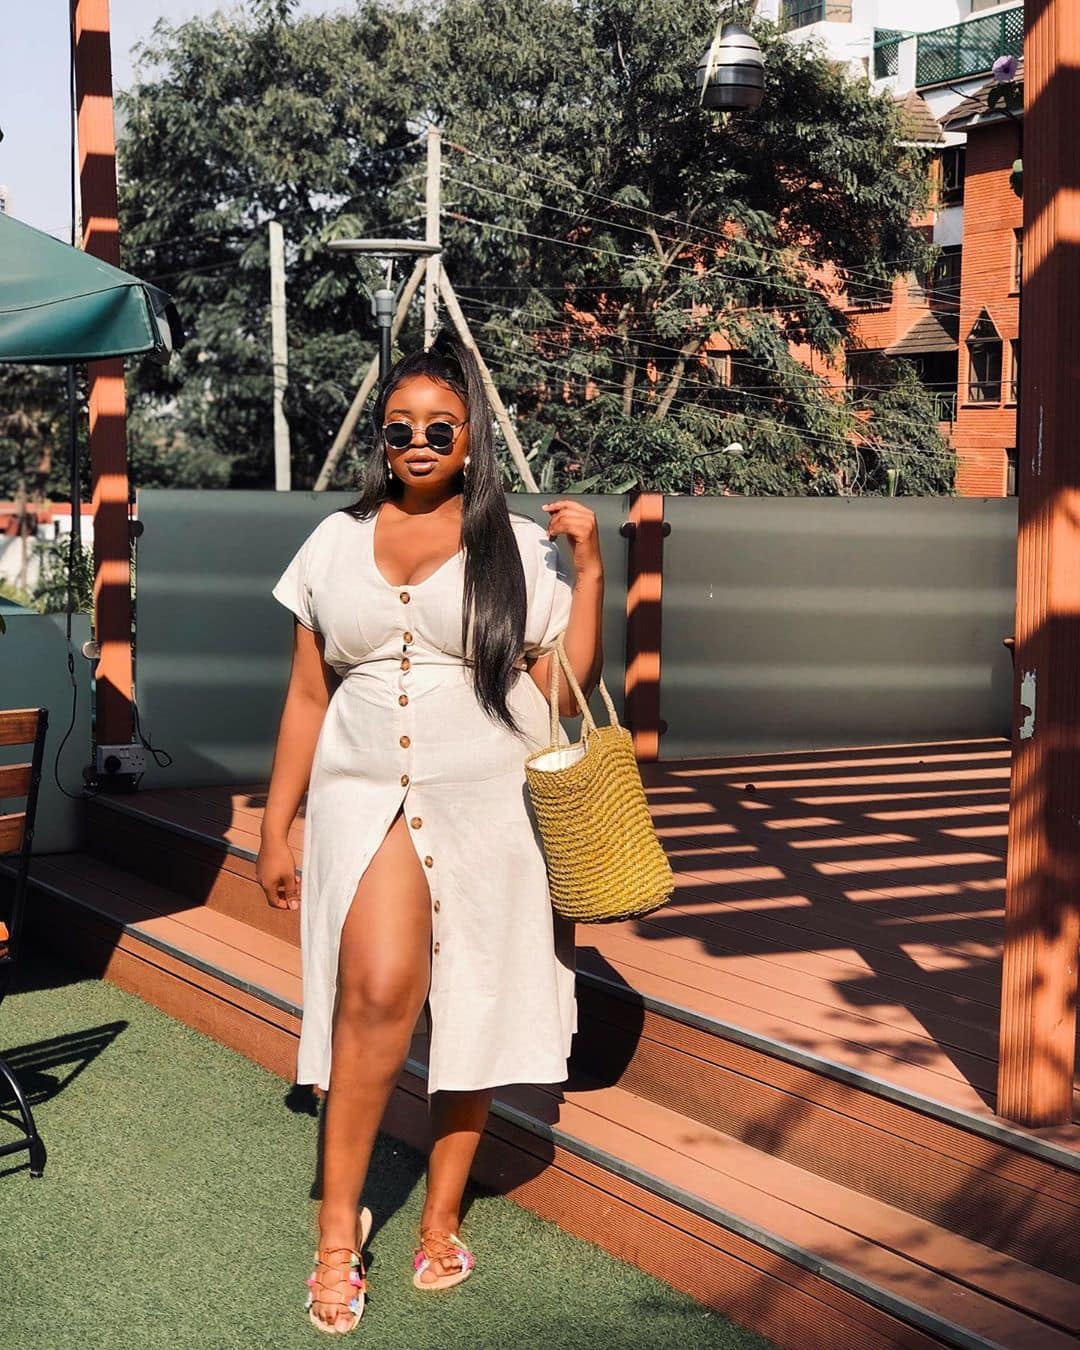 Thickleeyonce age, real name, size, weight loss, swim wear, modelling ...